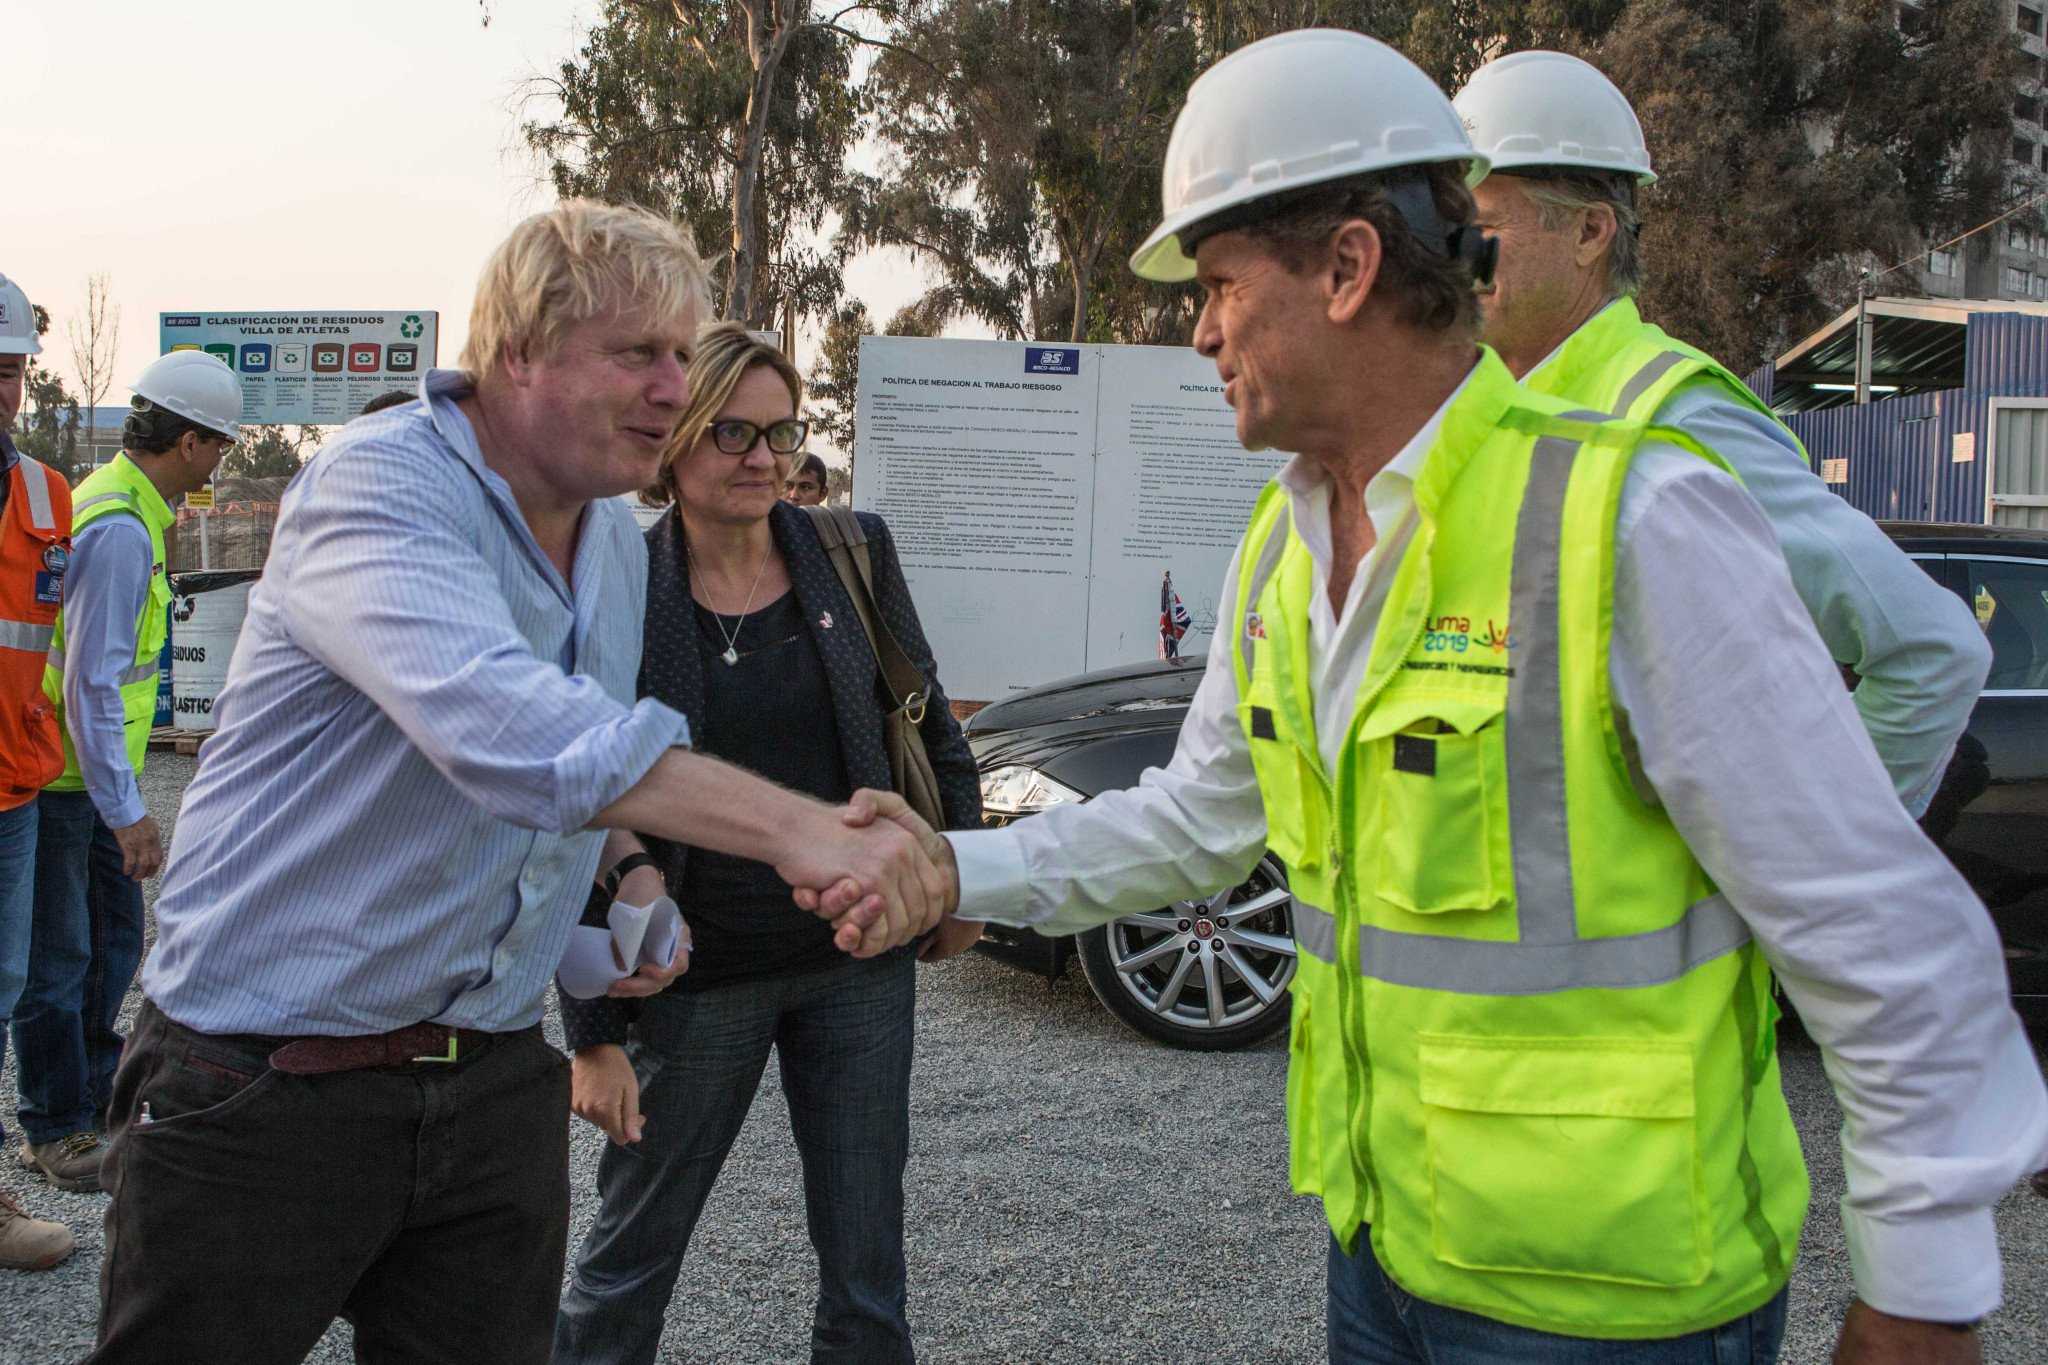 Boris Johnson, then British Foreign Secretary, visited Lima as part of the Government-to-Government Agreement ©Lima 2019